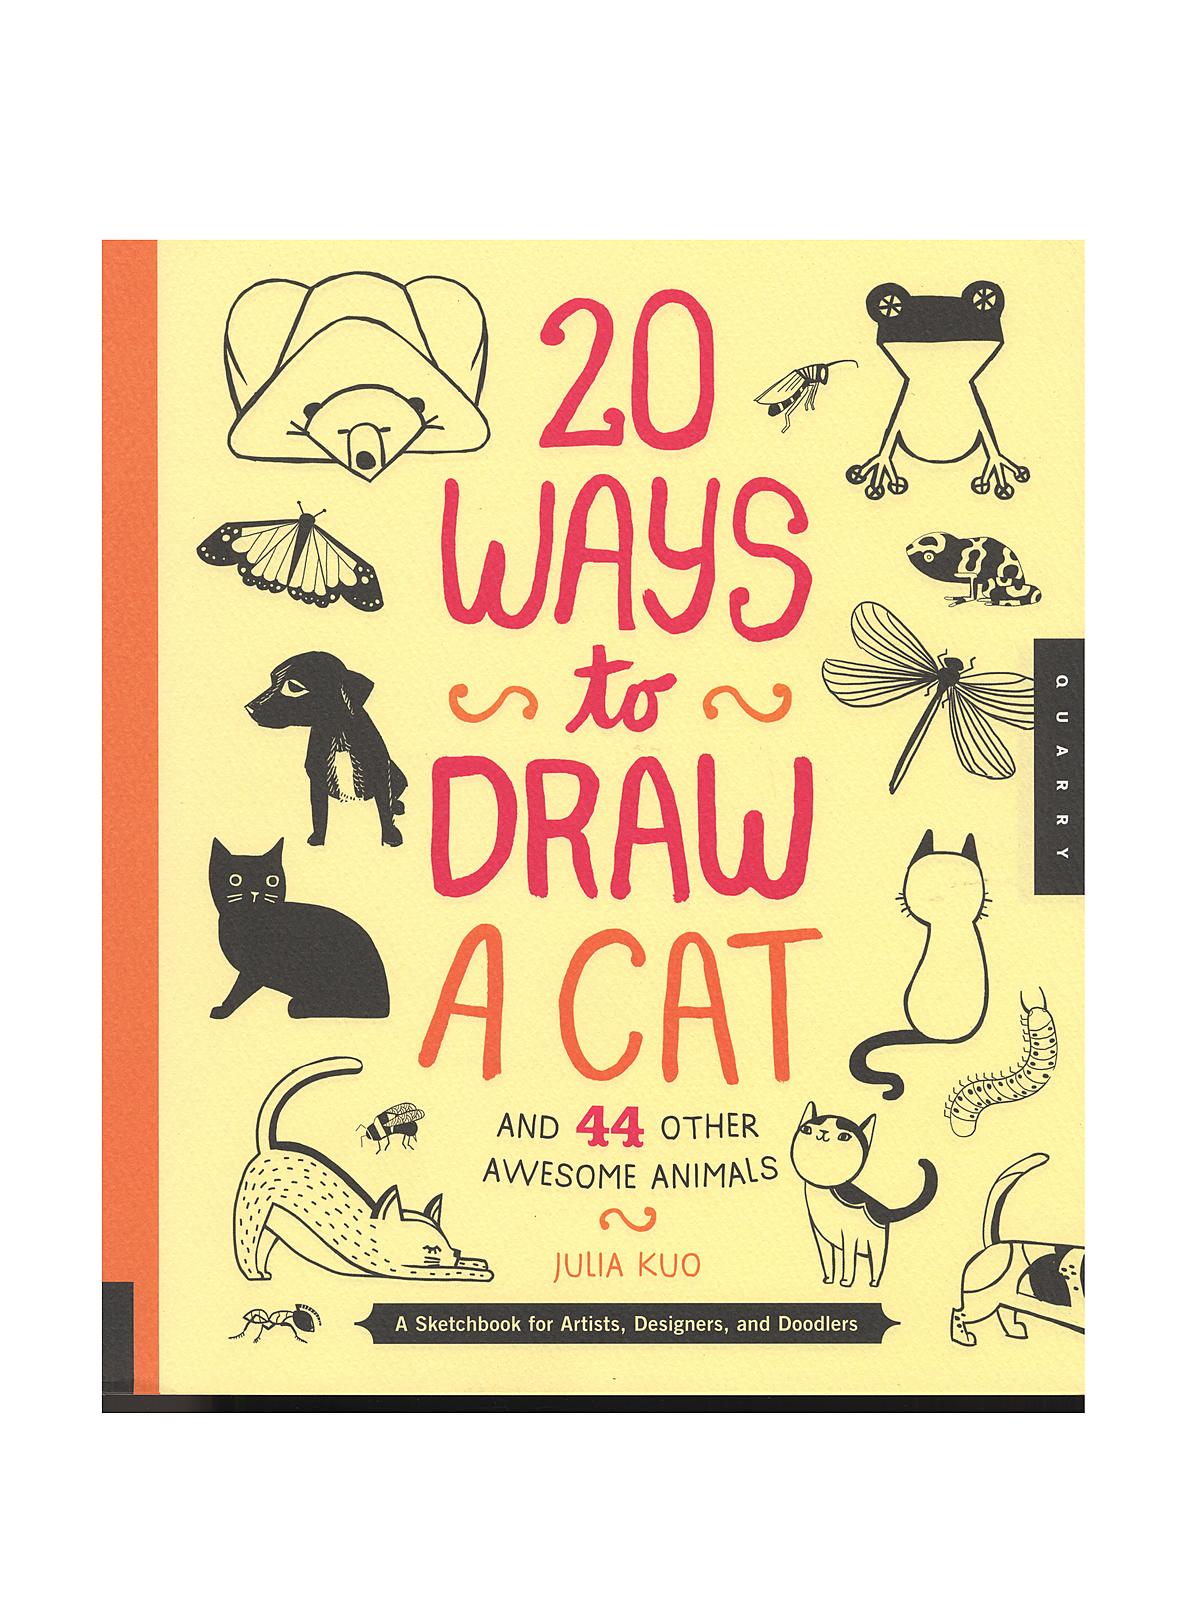 20 Ways Series 20 Ways To Draw A Cat And 44 Other Awesome Animals